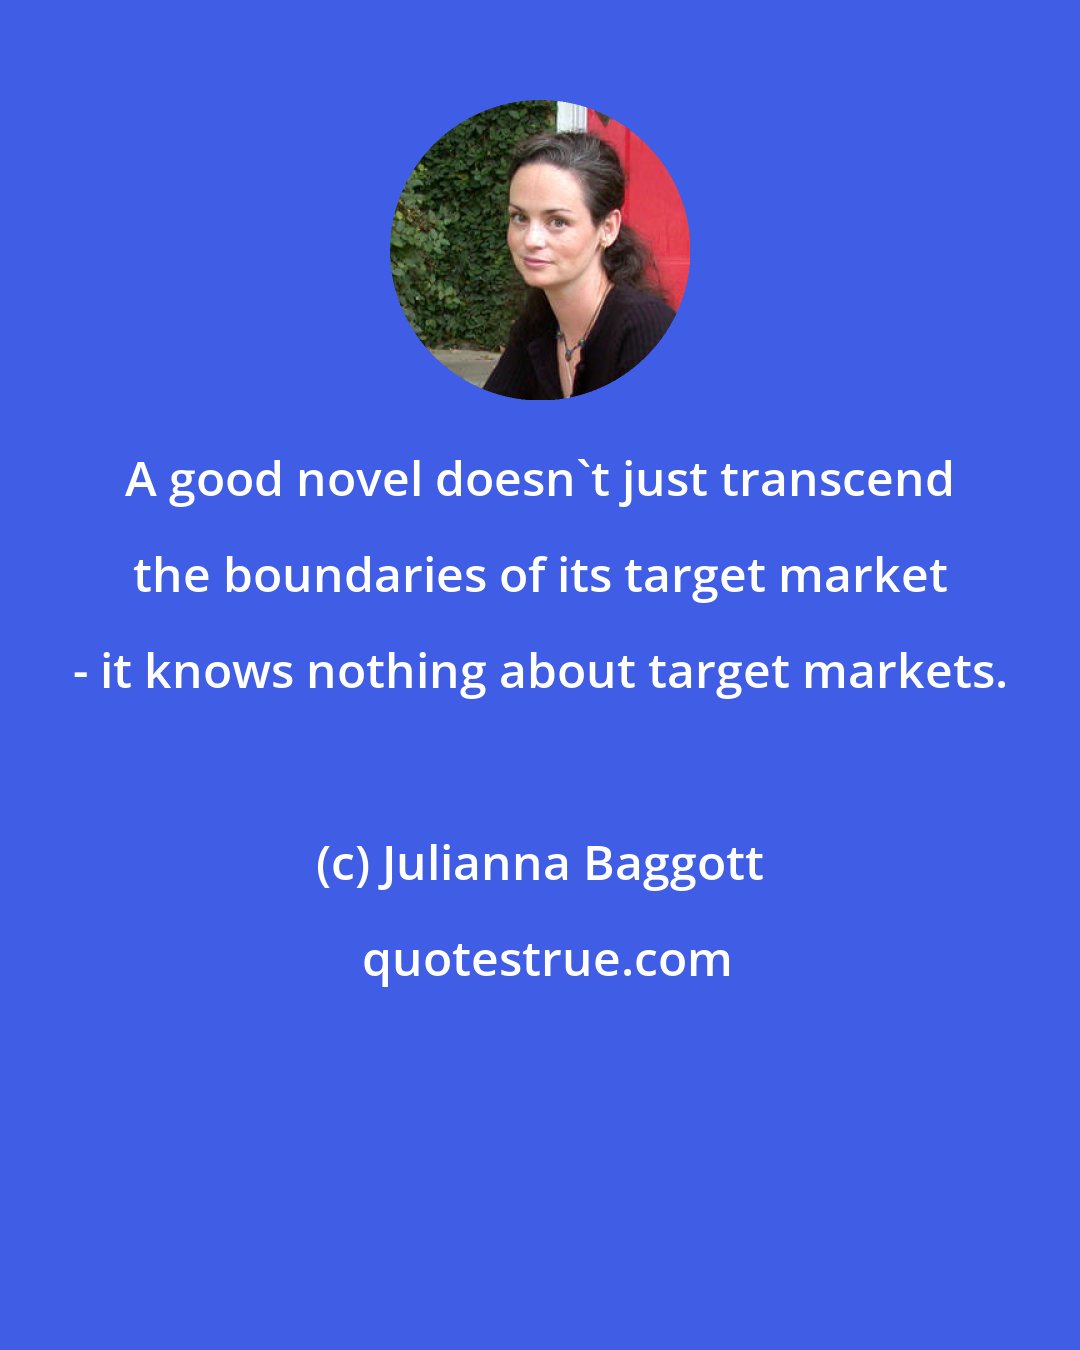 Julianna Baggott: A good novel doesn't just transcend the boundaries of its target market - it knows nothing about target markets.